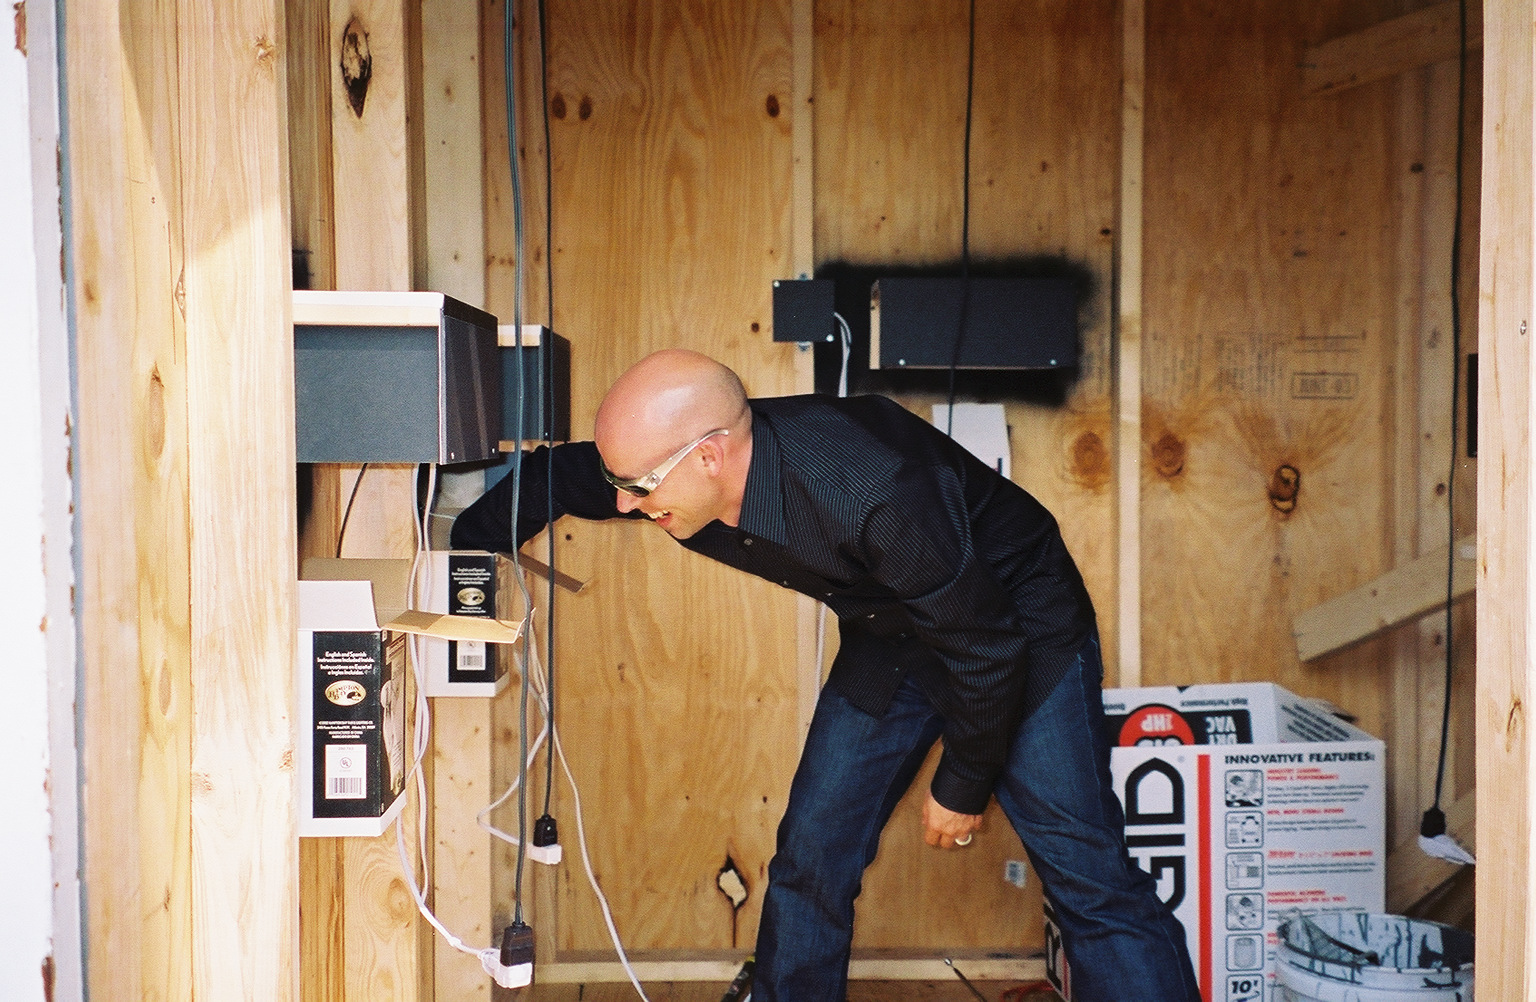 A photograph of a smiling individual in a black shirt and dark jeans reaching into a box against the wall, which is comprised of light-colored unstained wood.